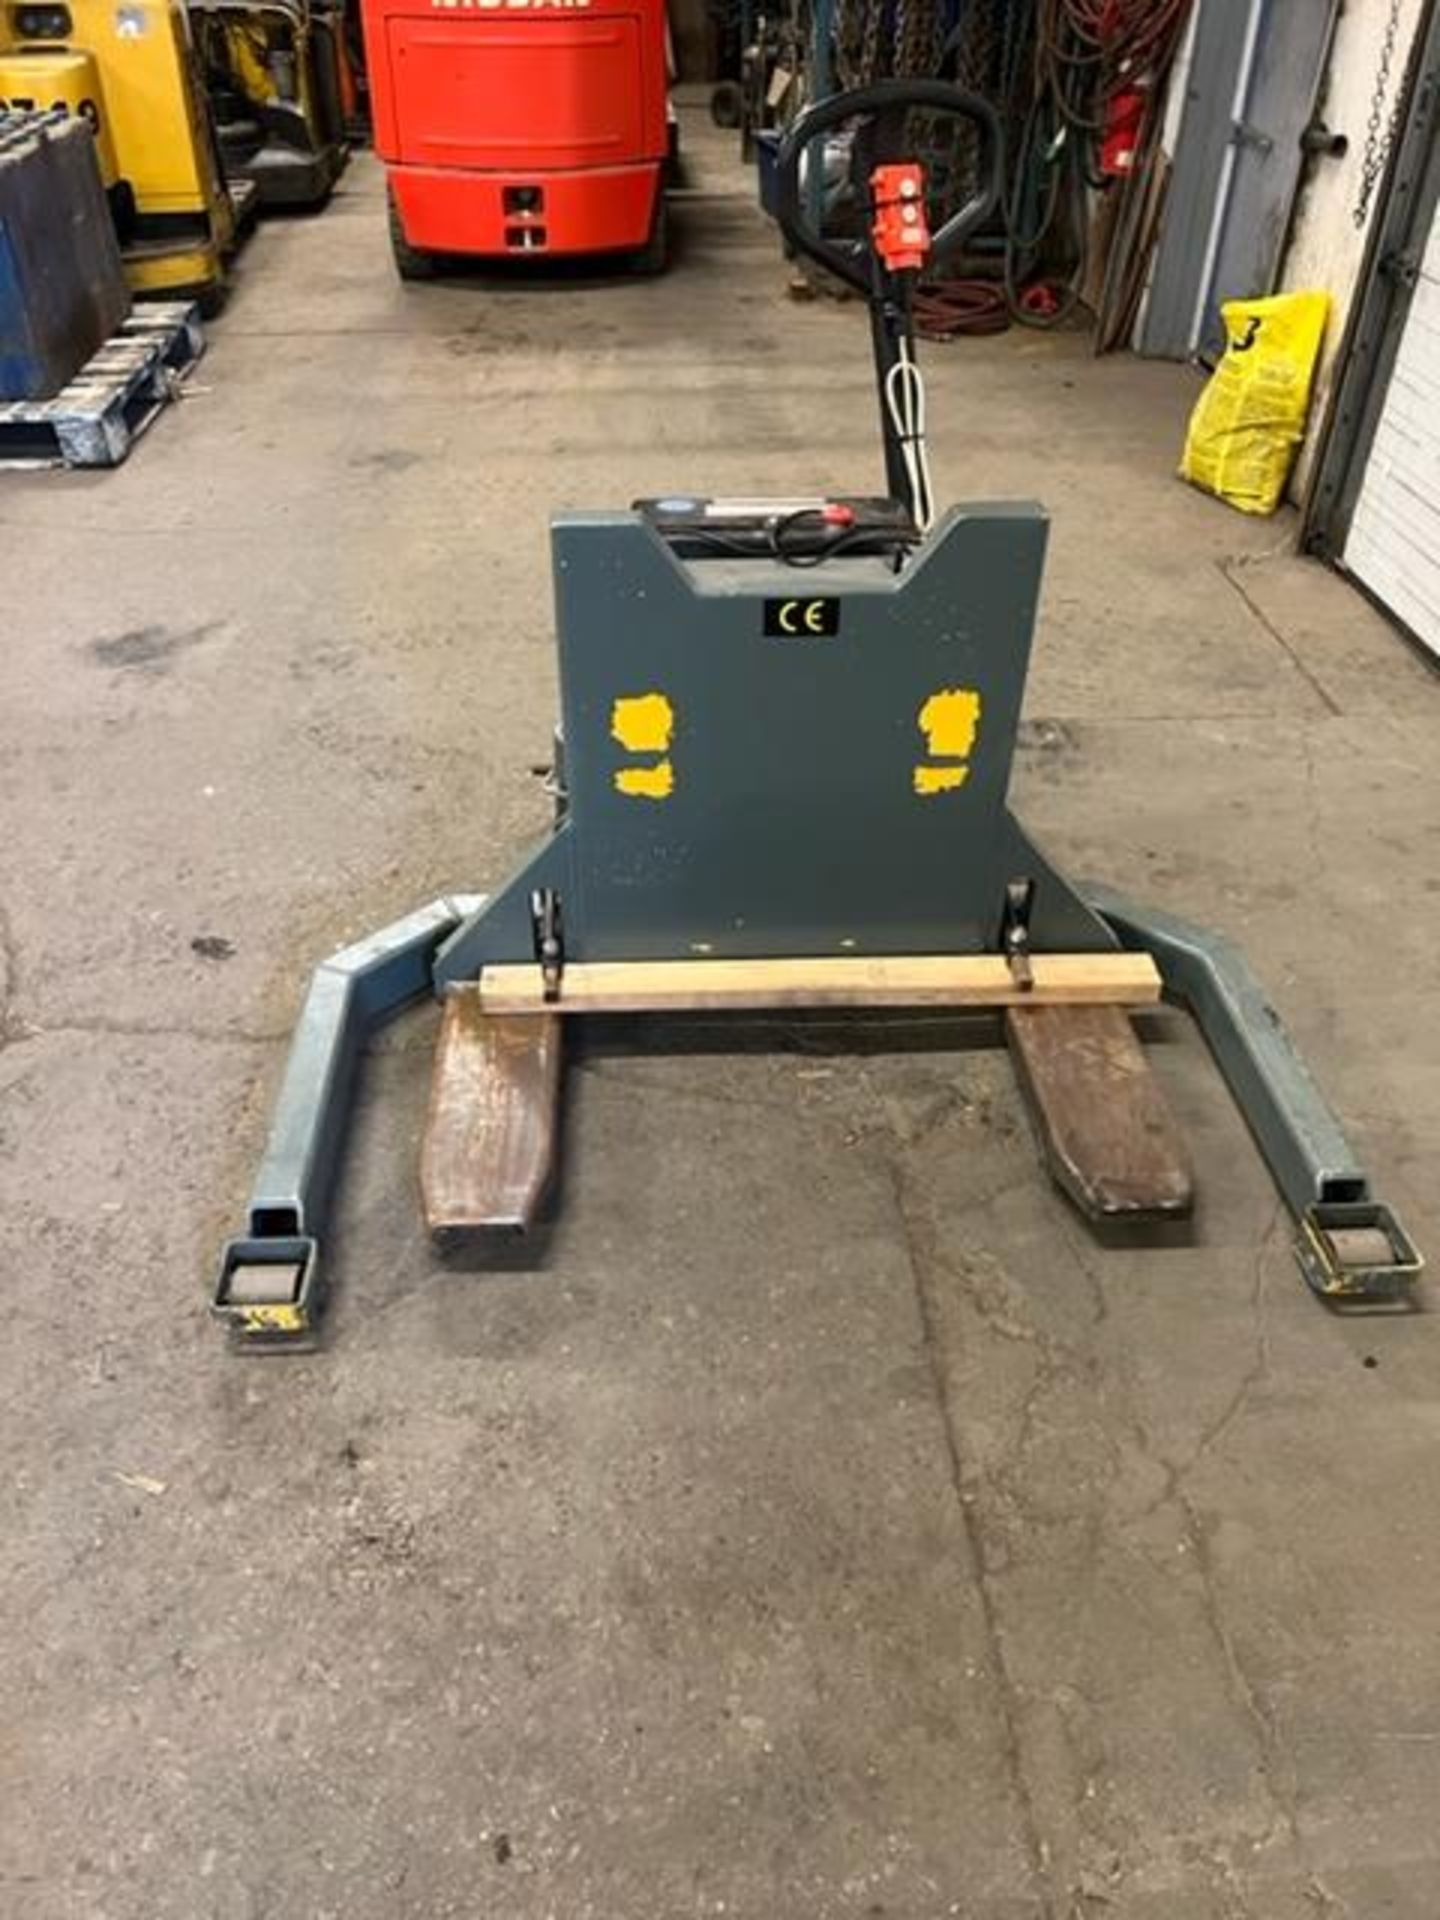 Tradesafe 800lbs Electric Pump Truck / Hydraulic Pallet Jack - NICE UNIT - Image 2 of 3